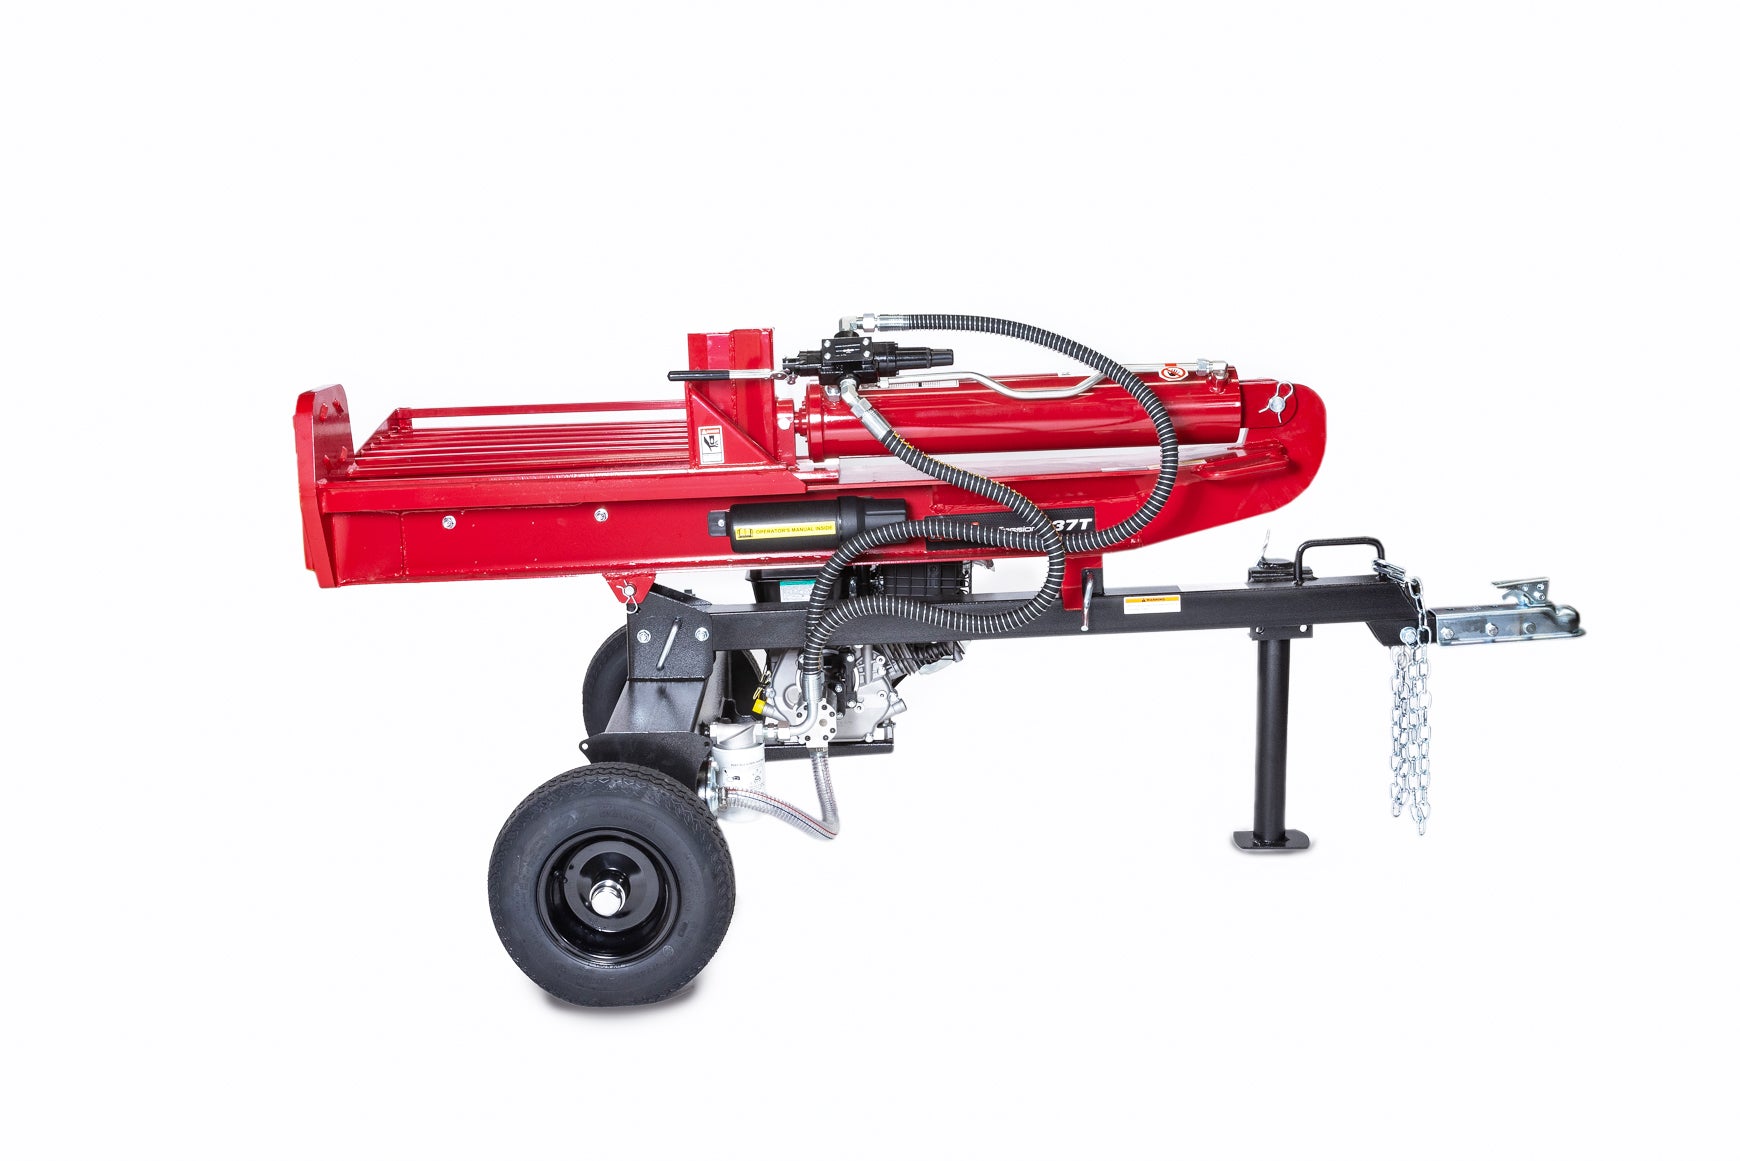 Load video: Our extensive range of manual and powered Professional Log splitters - available in 12T Man, 12T, 27T,32T and 37T are designed to split your gnarly wood chunks, branch crotches, end cuts and firewood logs with ease, ensuring maximum efficiency and optimal productivity. The manual 12T is perfect to have as a stand by on your ute’s tray and the hydraulic units range from 12T through to 37T operating both horizontally and vertically.